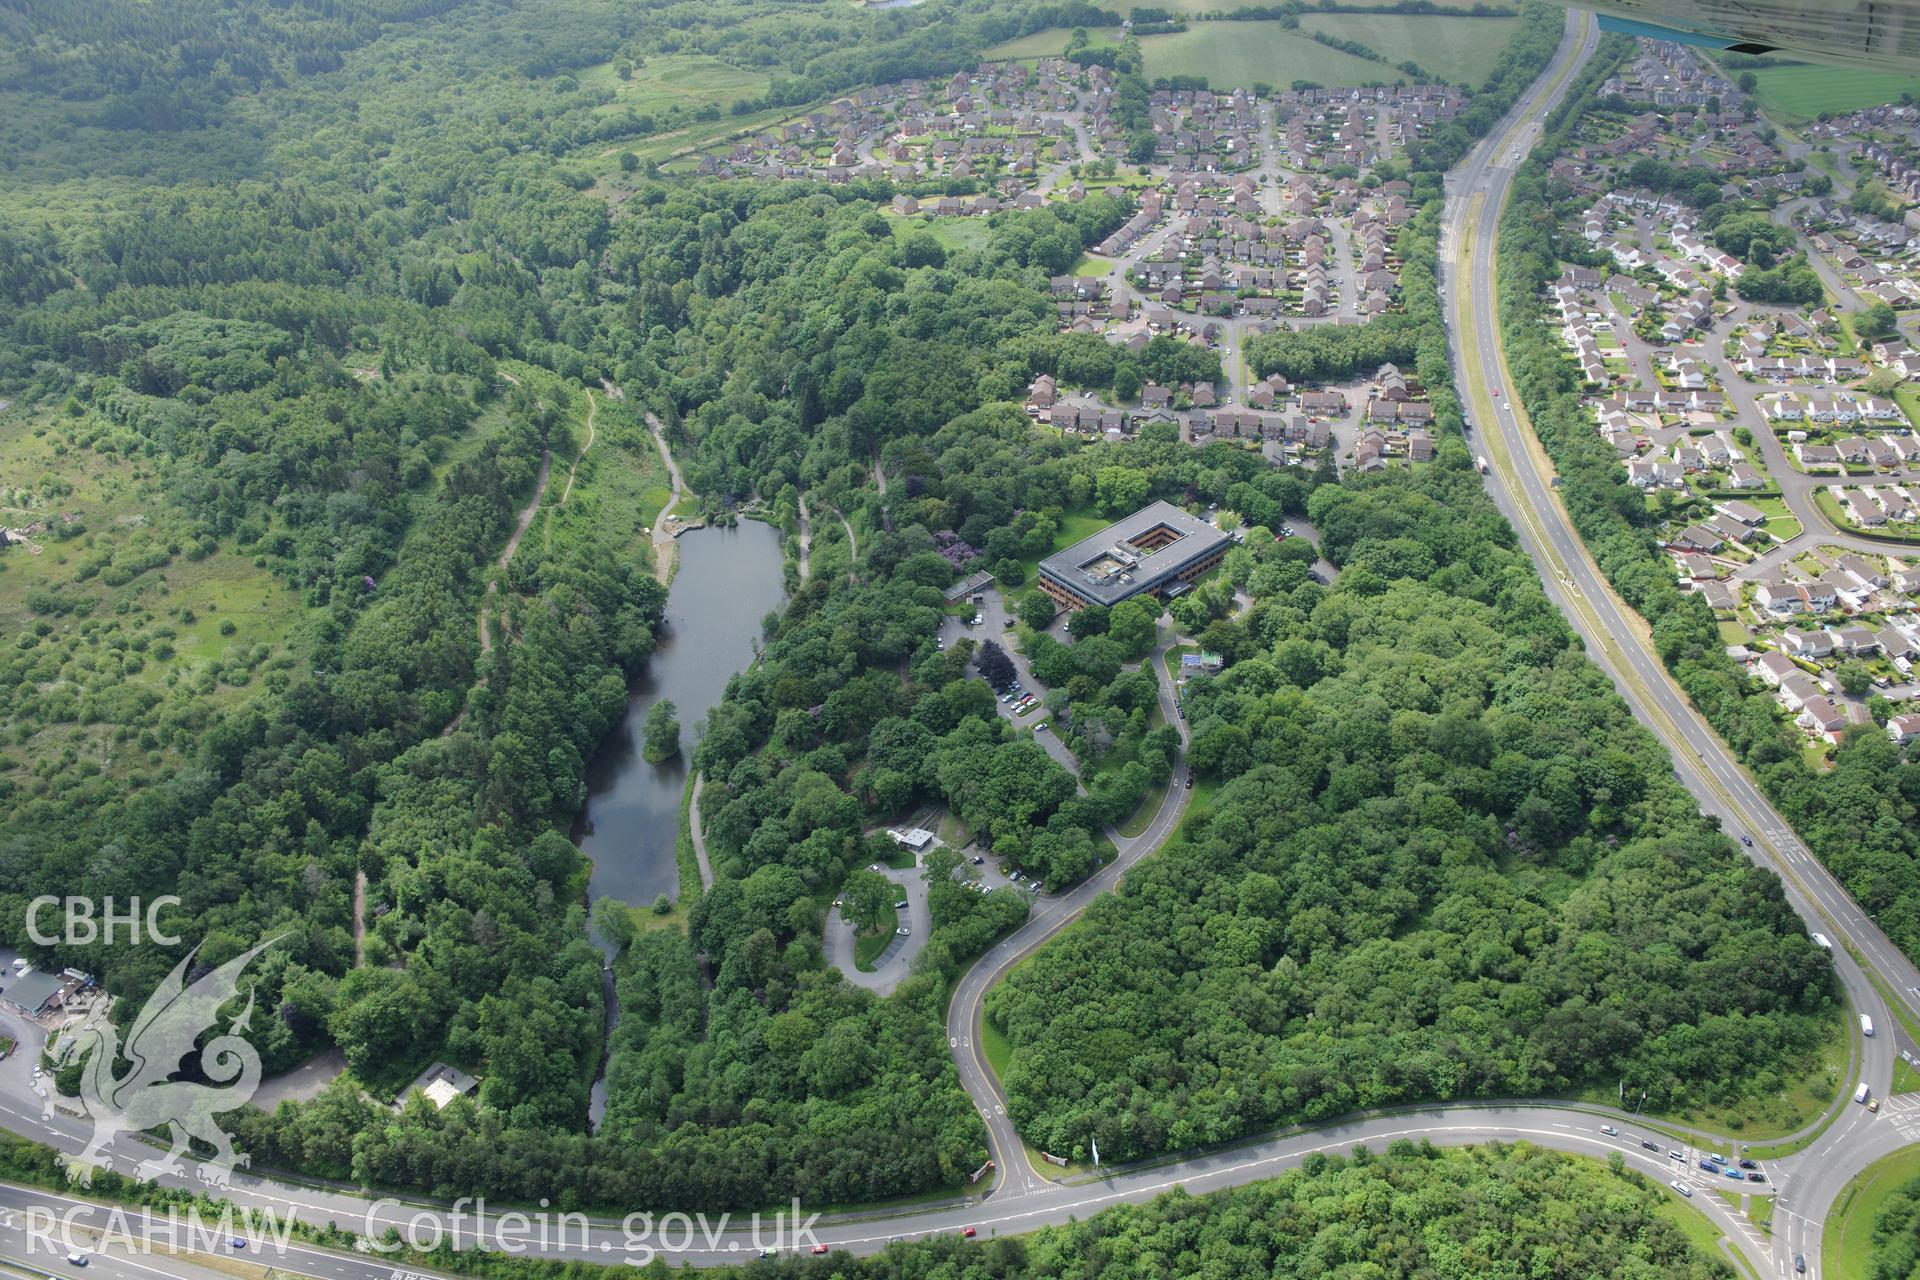 Lliw Valley (or Penllergaer) Civic centre at Penllergaer Park, and the village of Penllergaer. Oblique aerial photograph taken during the Royal Commission's programme of archaeological aerial reconnaissance by Toby Driver on 19th June 2015.